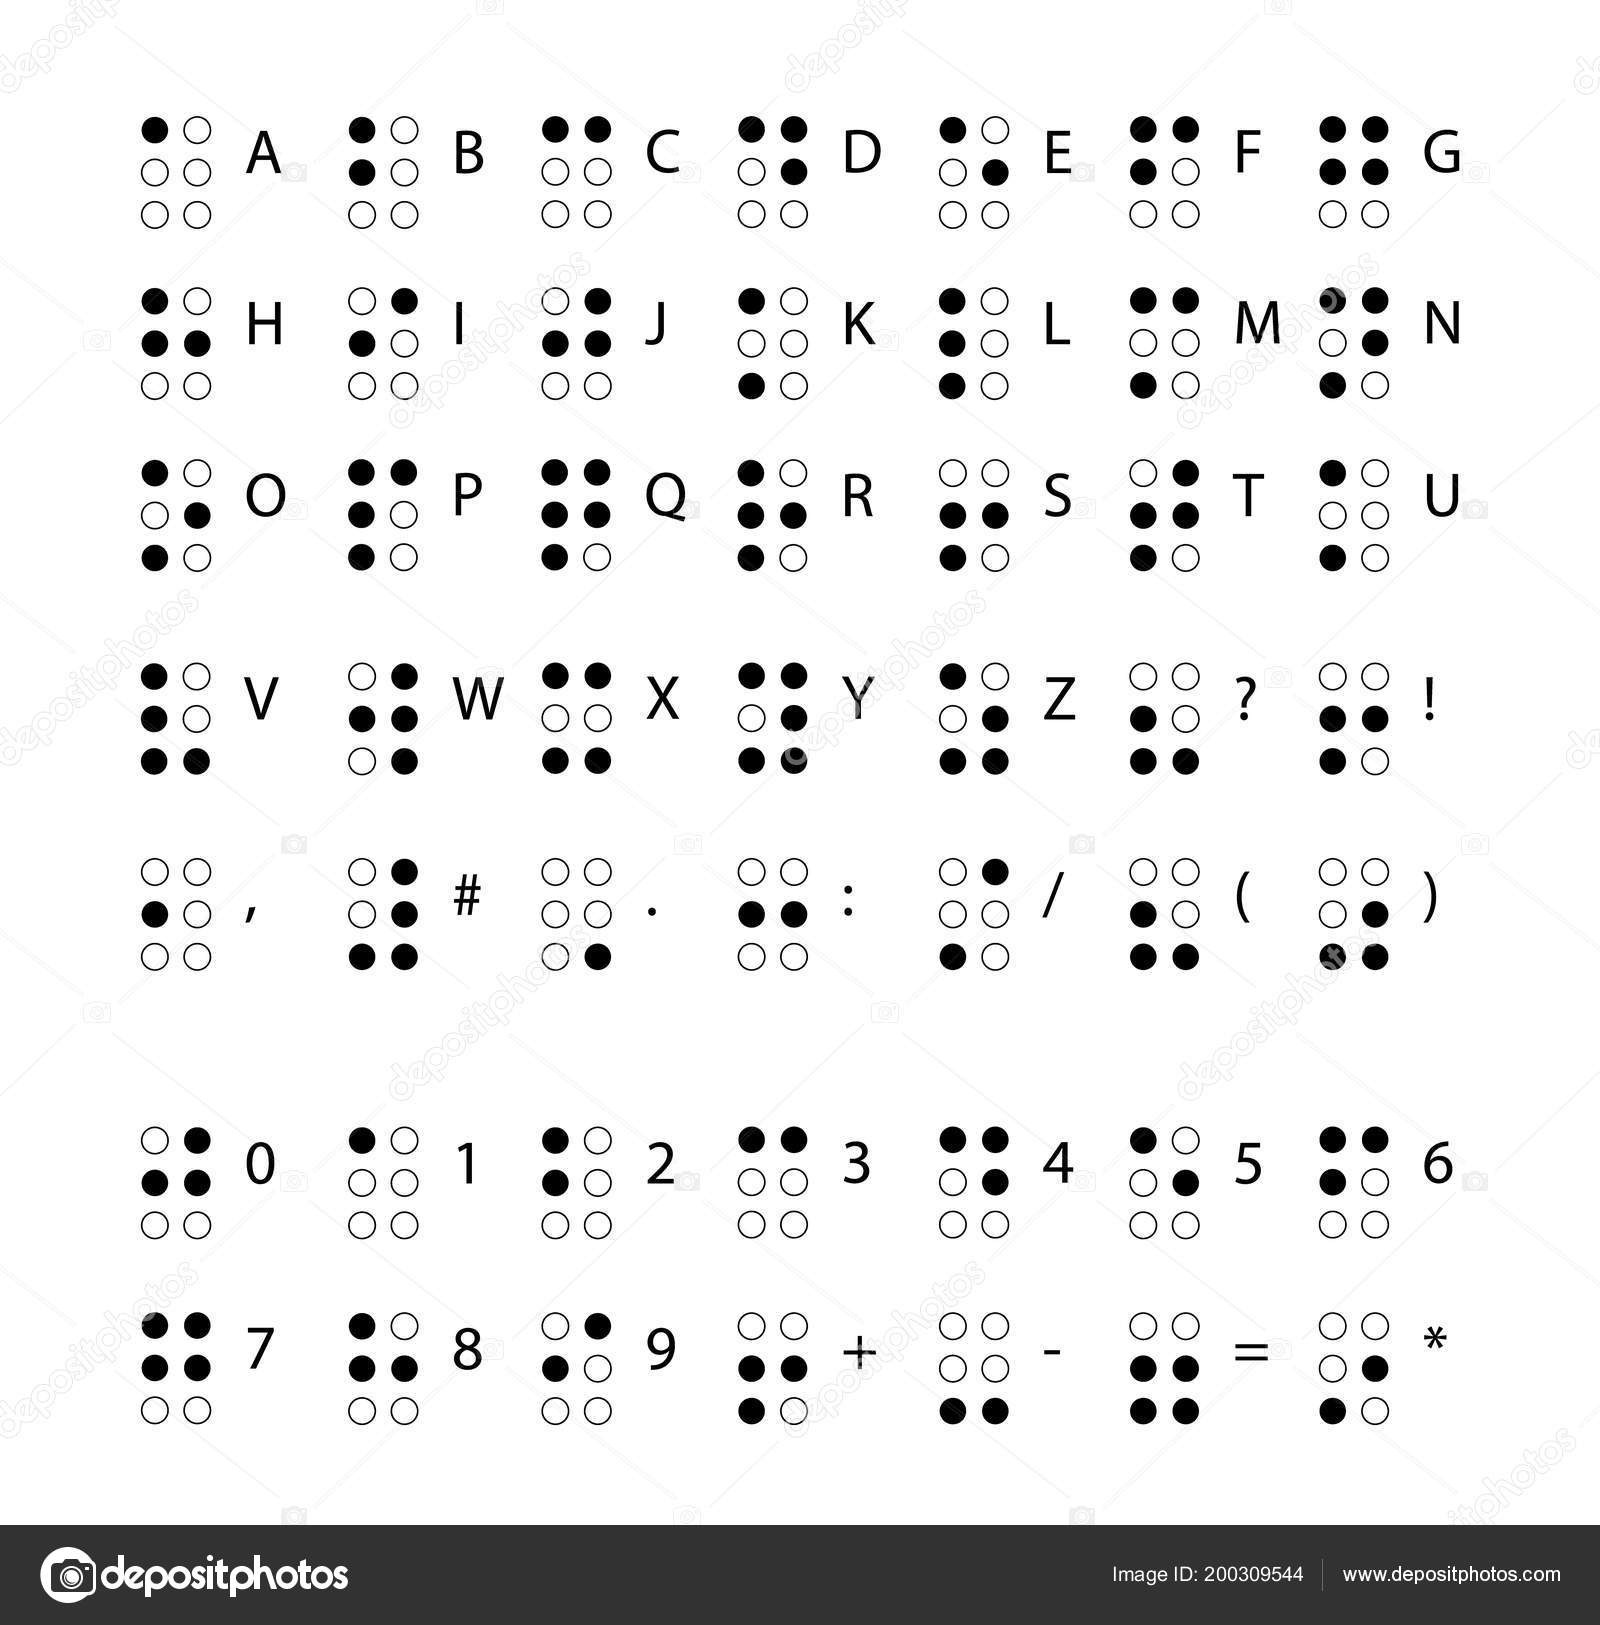 braille-alphabet-letters-alphabet-blind-tactile-writing-system-used